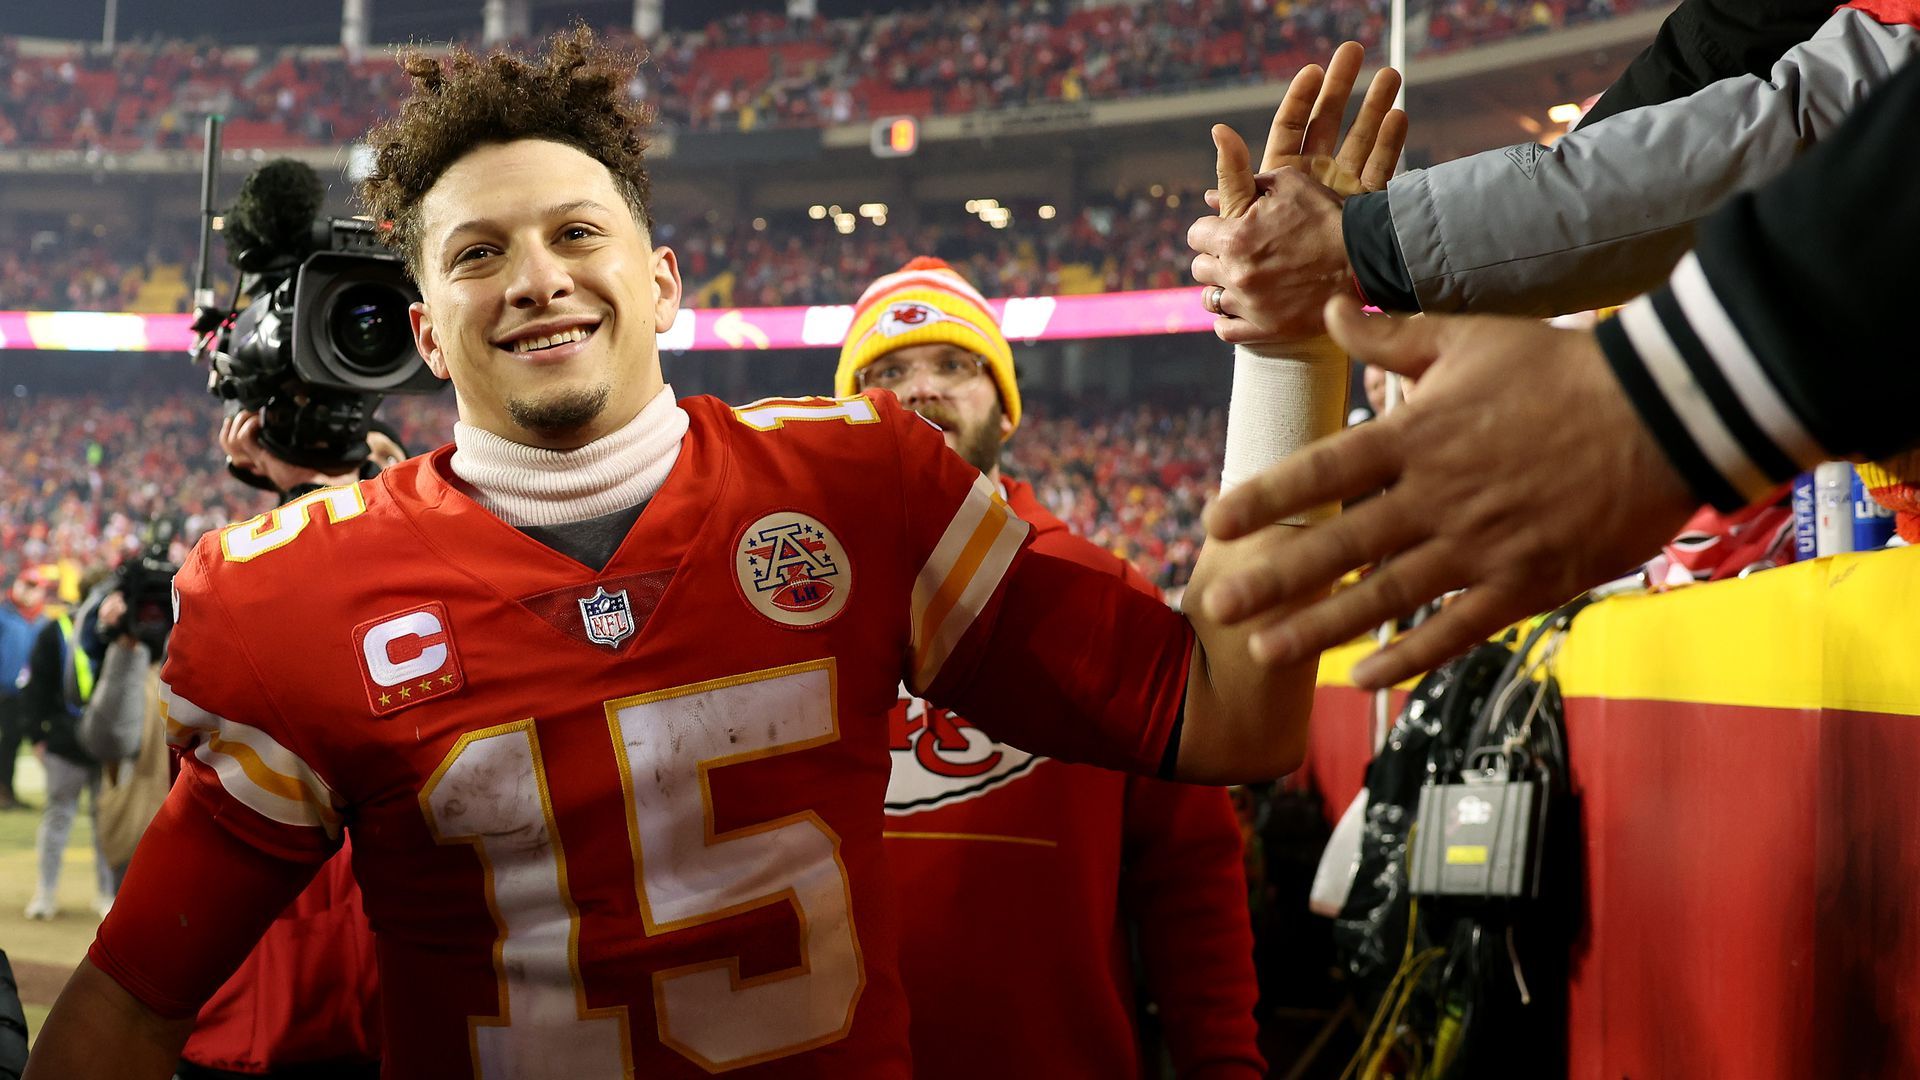 Picture of Patrick Mahomes high fiving a member of the public